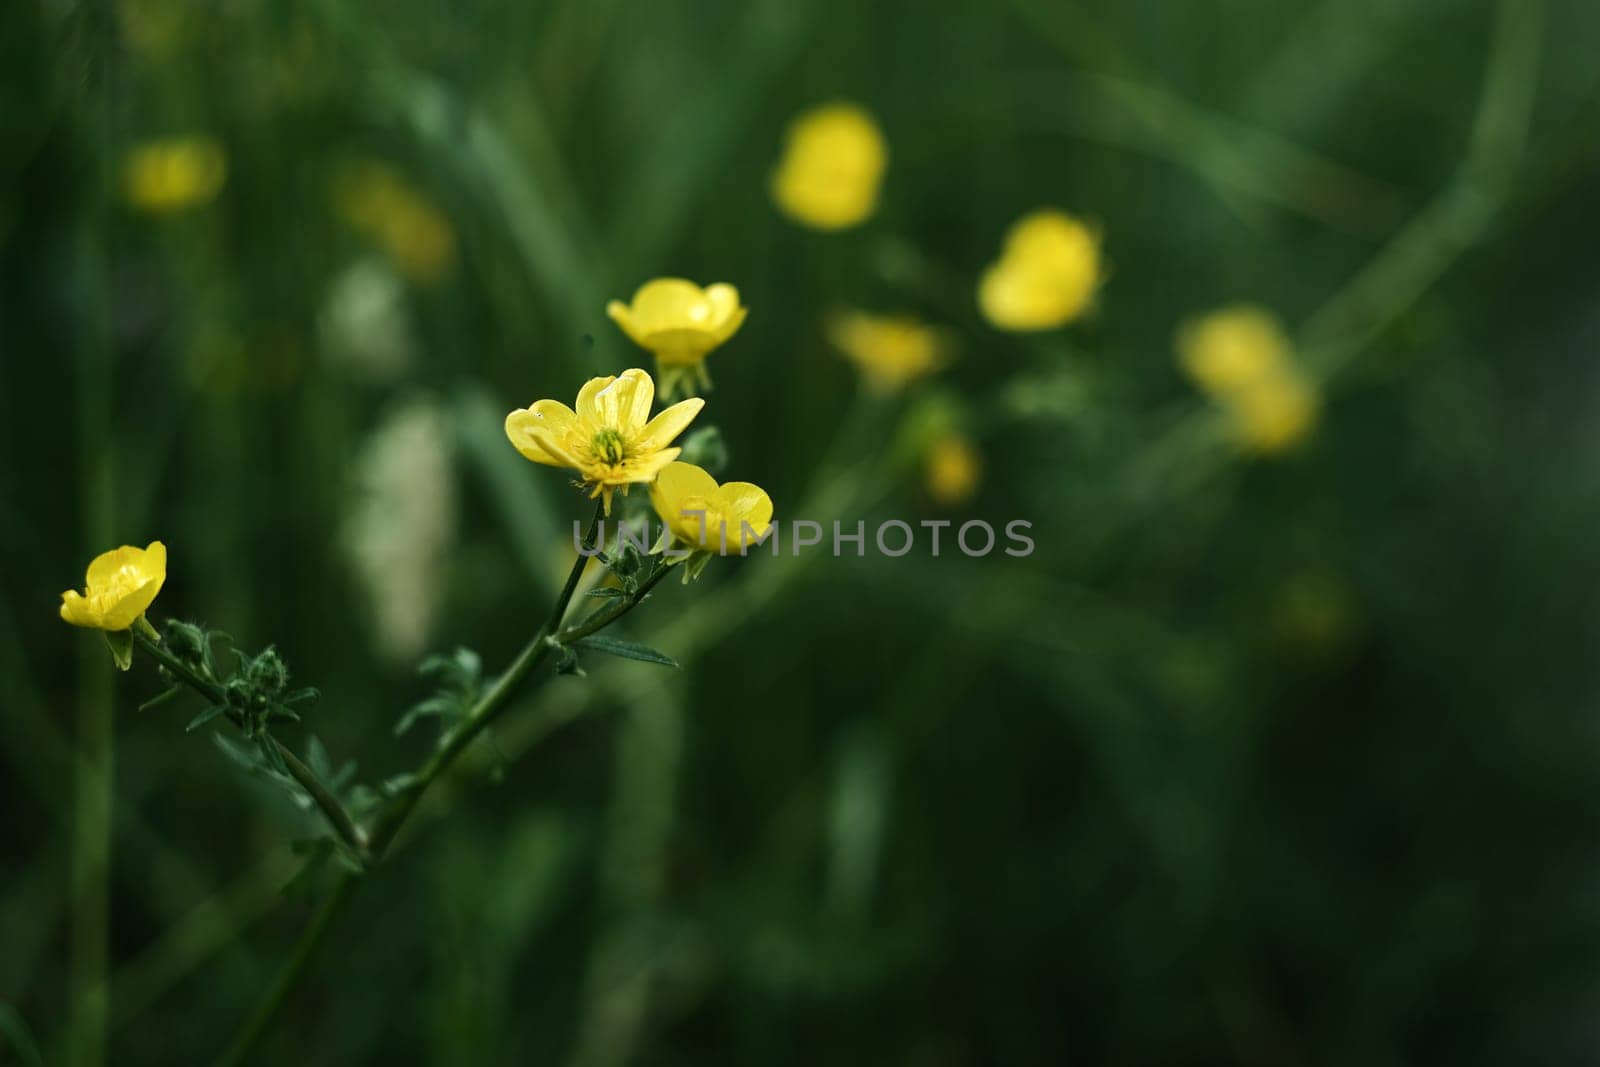 Buttercups wild flowers on a green blurred grass background. by N_Design